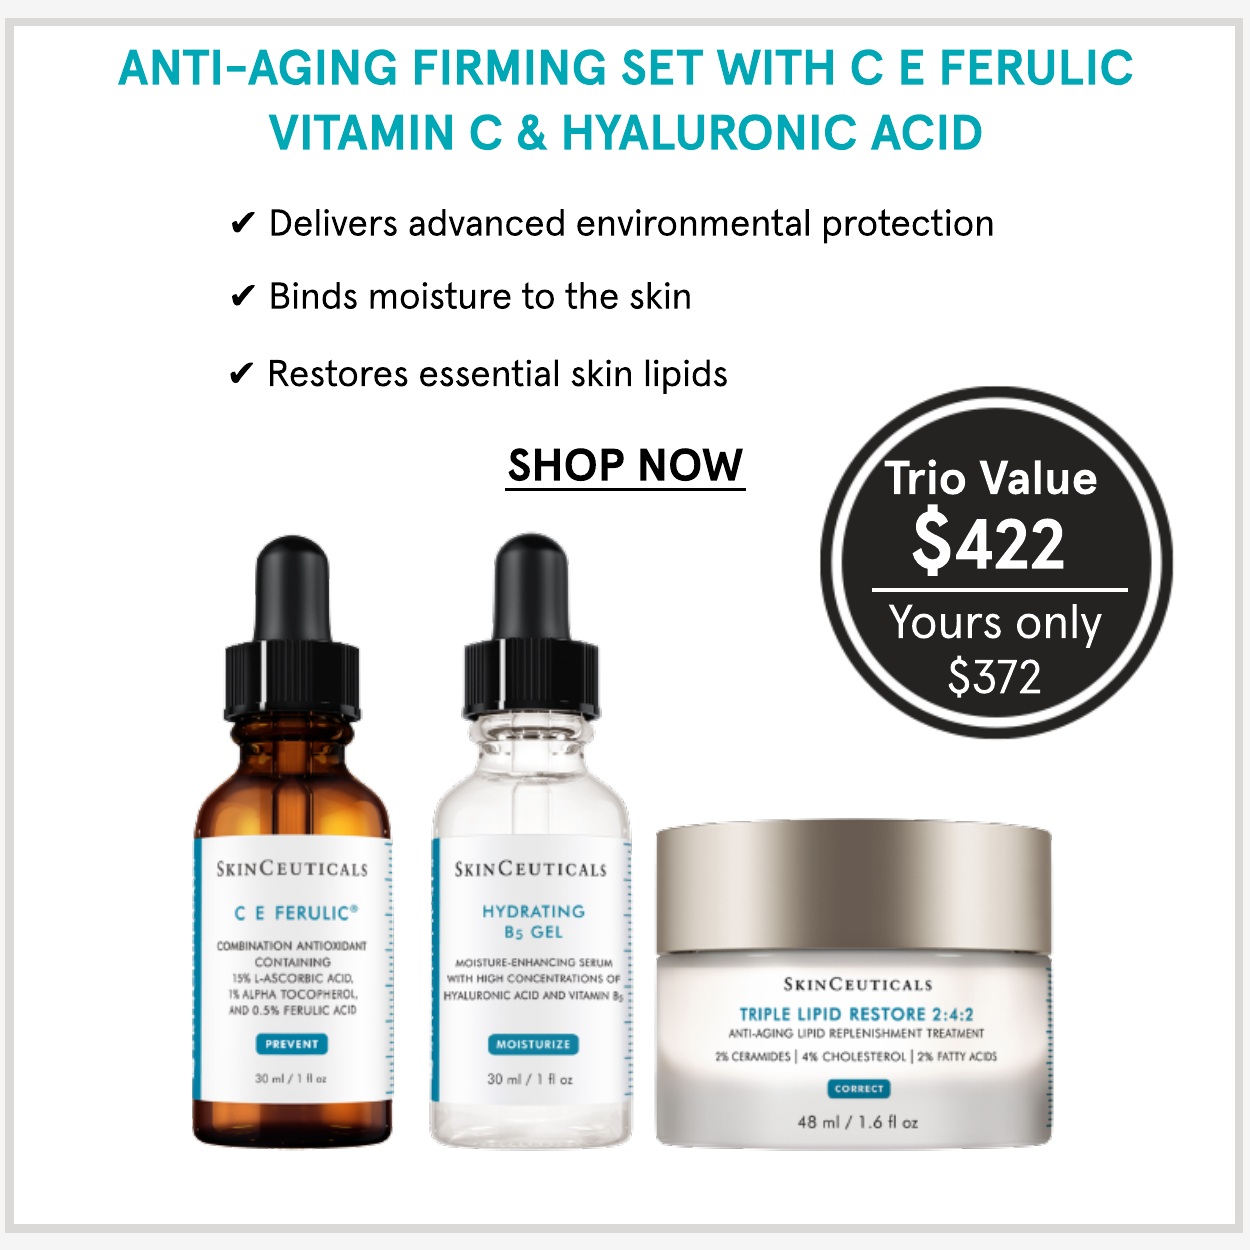 Anti-Aging Firming Set with C E Ferulic Vitamin C and Hyaluronic Acid